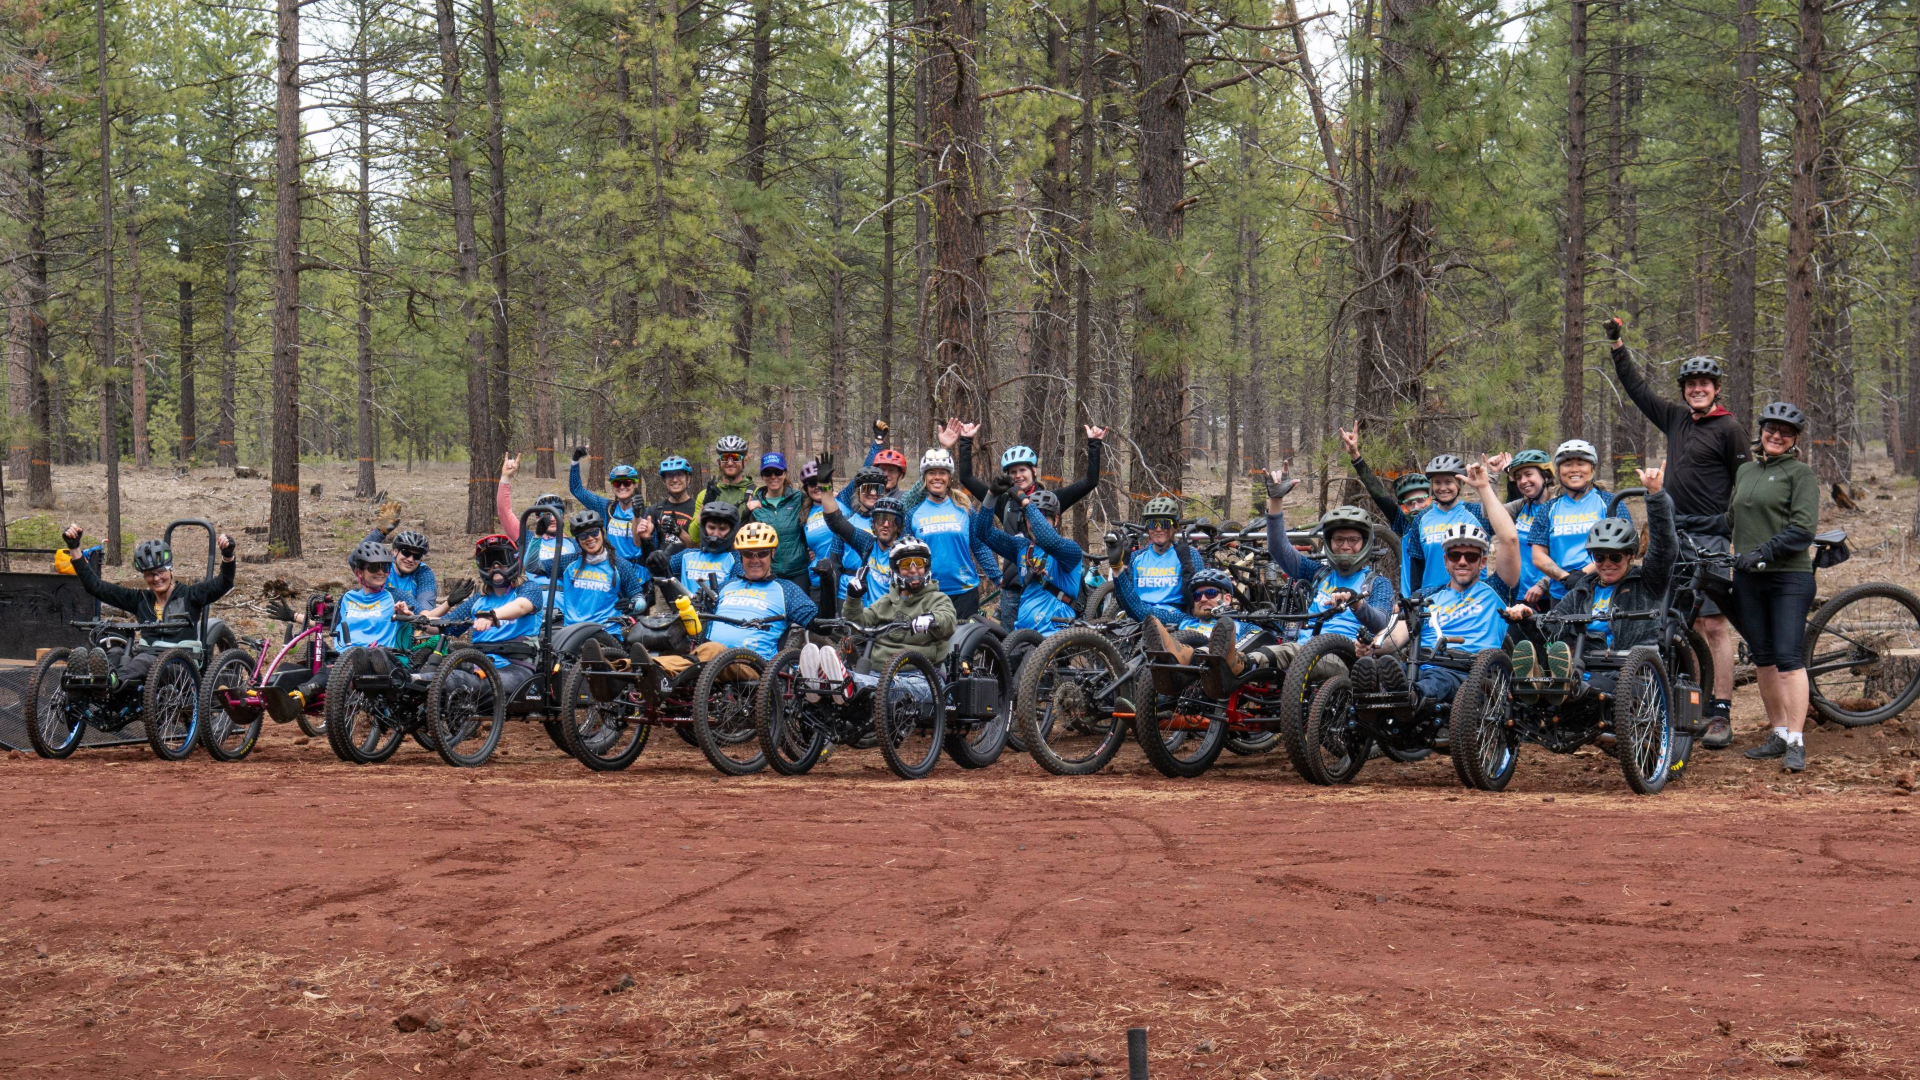 20 athletes in aMTBs and OAS volunteers and staff rally together in a group photo with tall pines lining their background